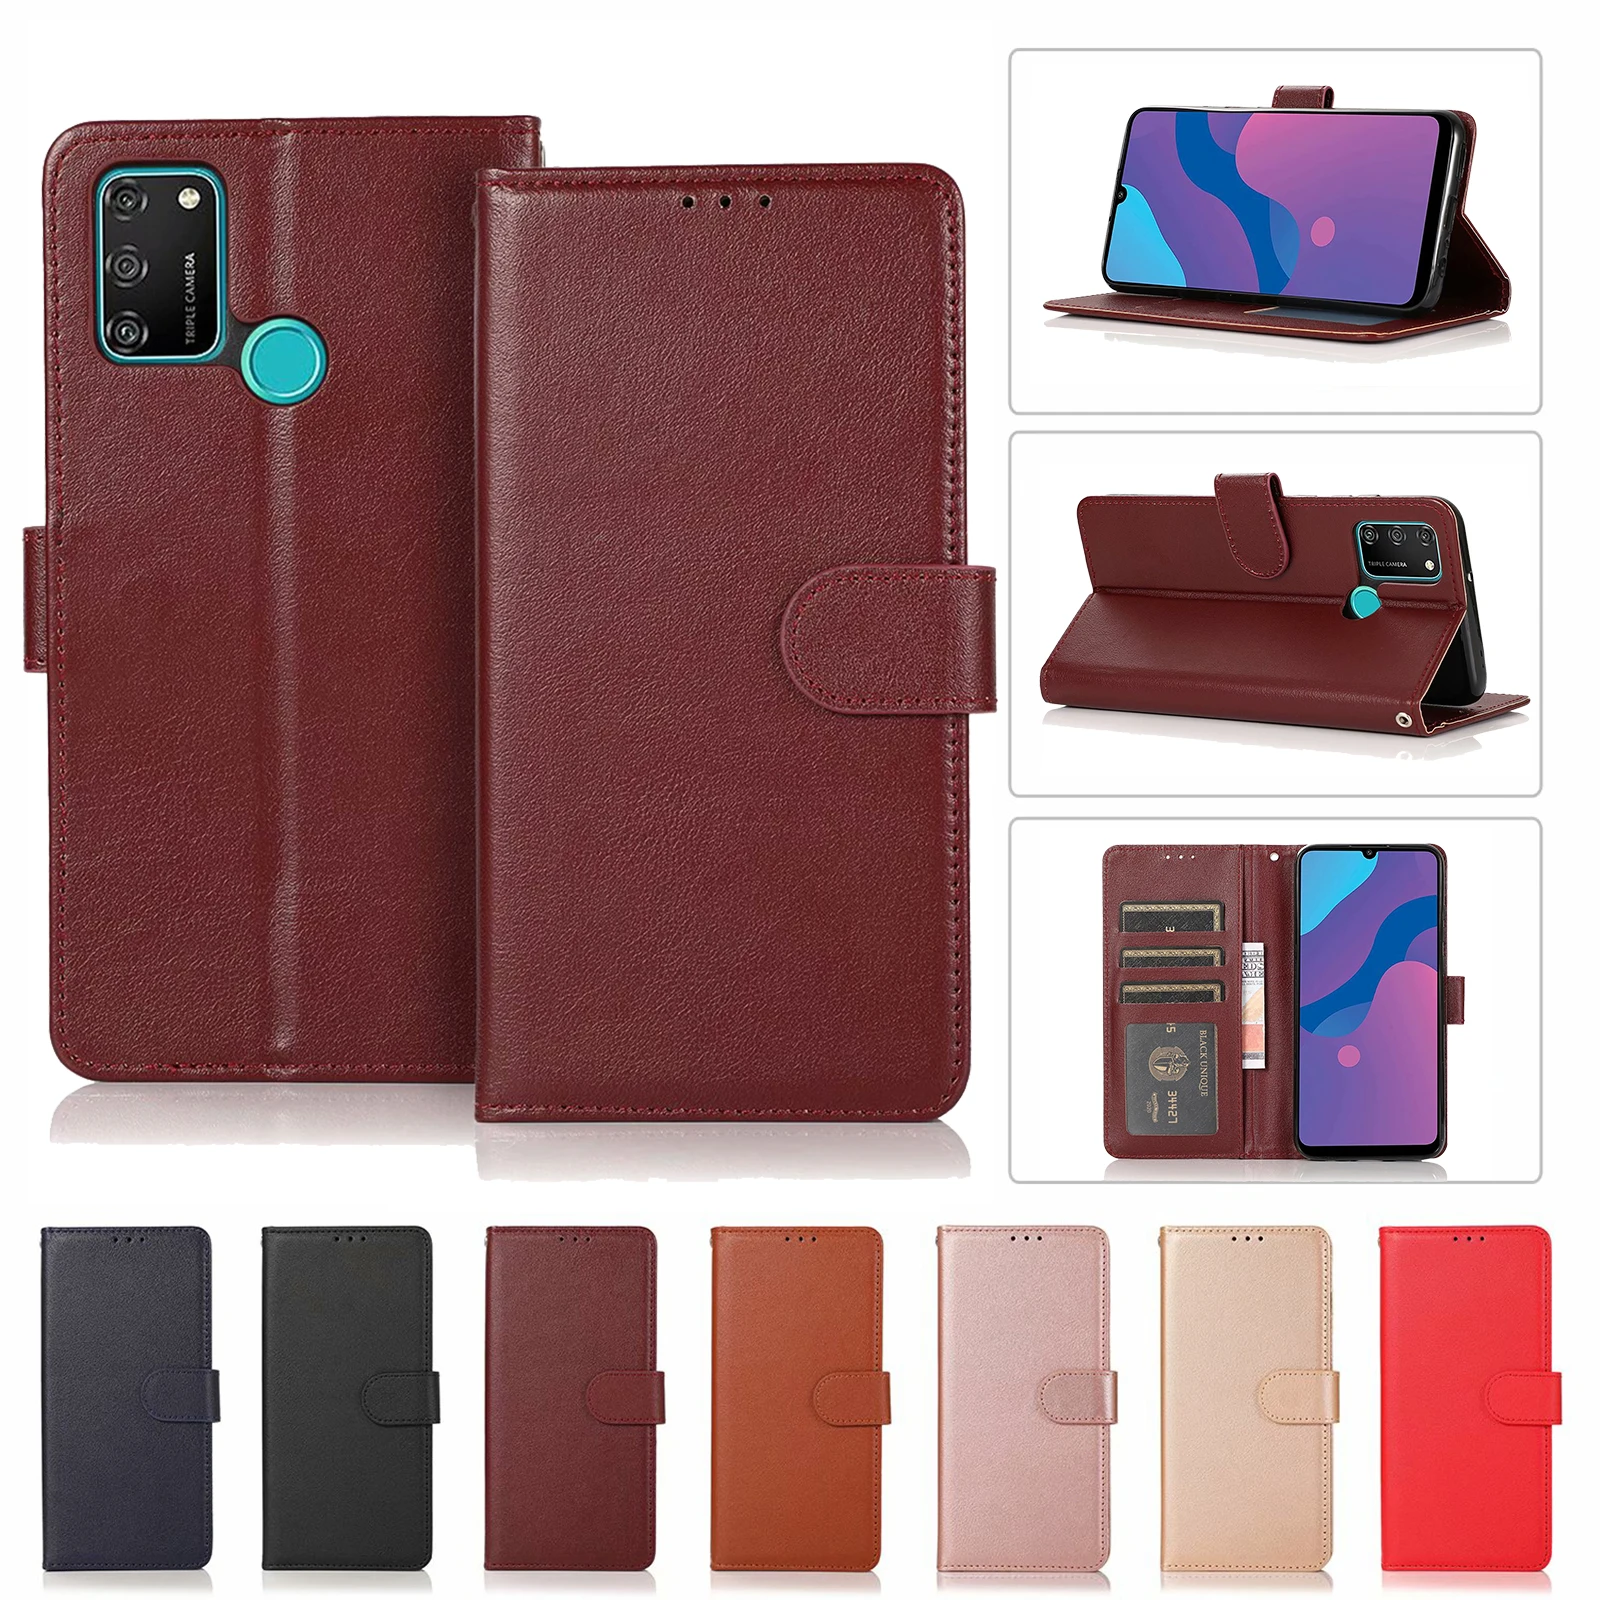 

Wallet Leather Case for Huawei Honor 10 9 20 Lite Pro 9A 9C 9S 8A 8X 8S 7A 7S 7C 6A 7S 10i 9i 20i Flip Wallet Case Housing Funda